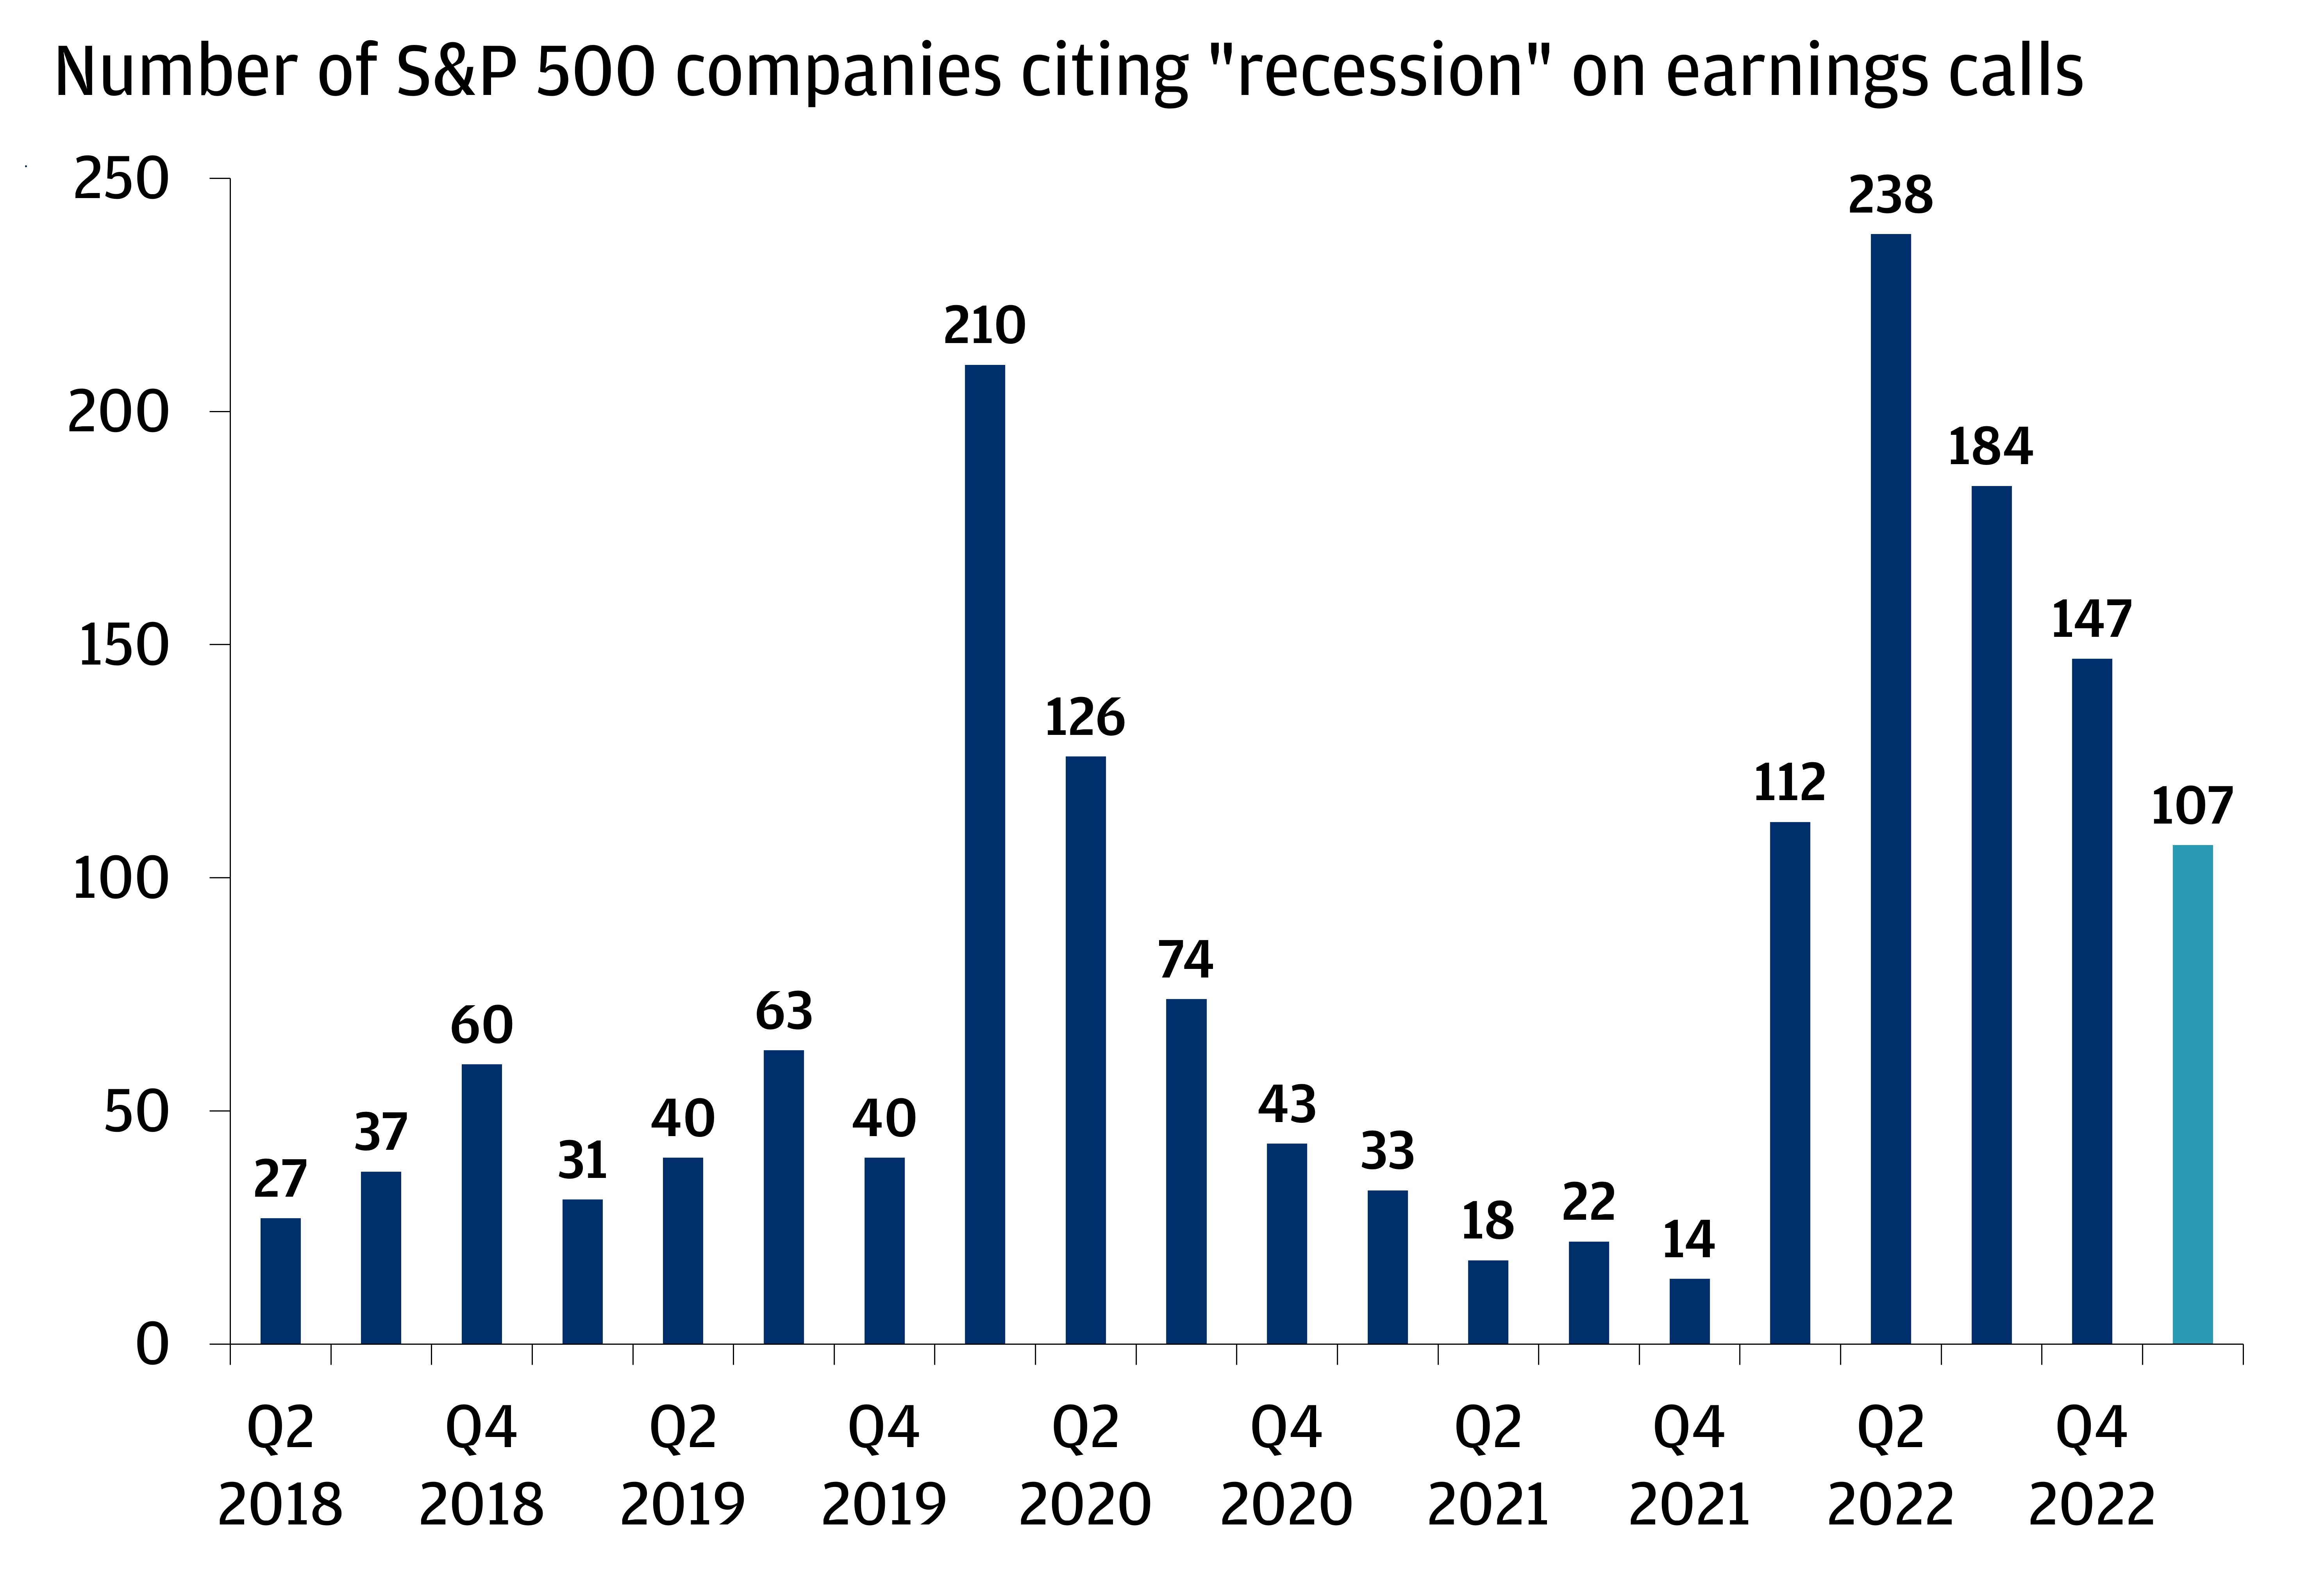 This chart shows that fewer companies are citing recession on their earnings calls, and shows the number of times “recession” was mentioned from Q2 2018 through Q1 2023.